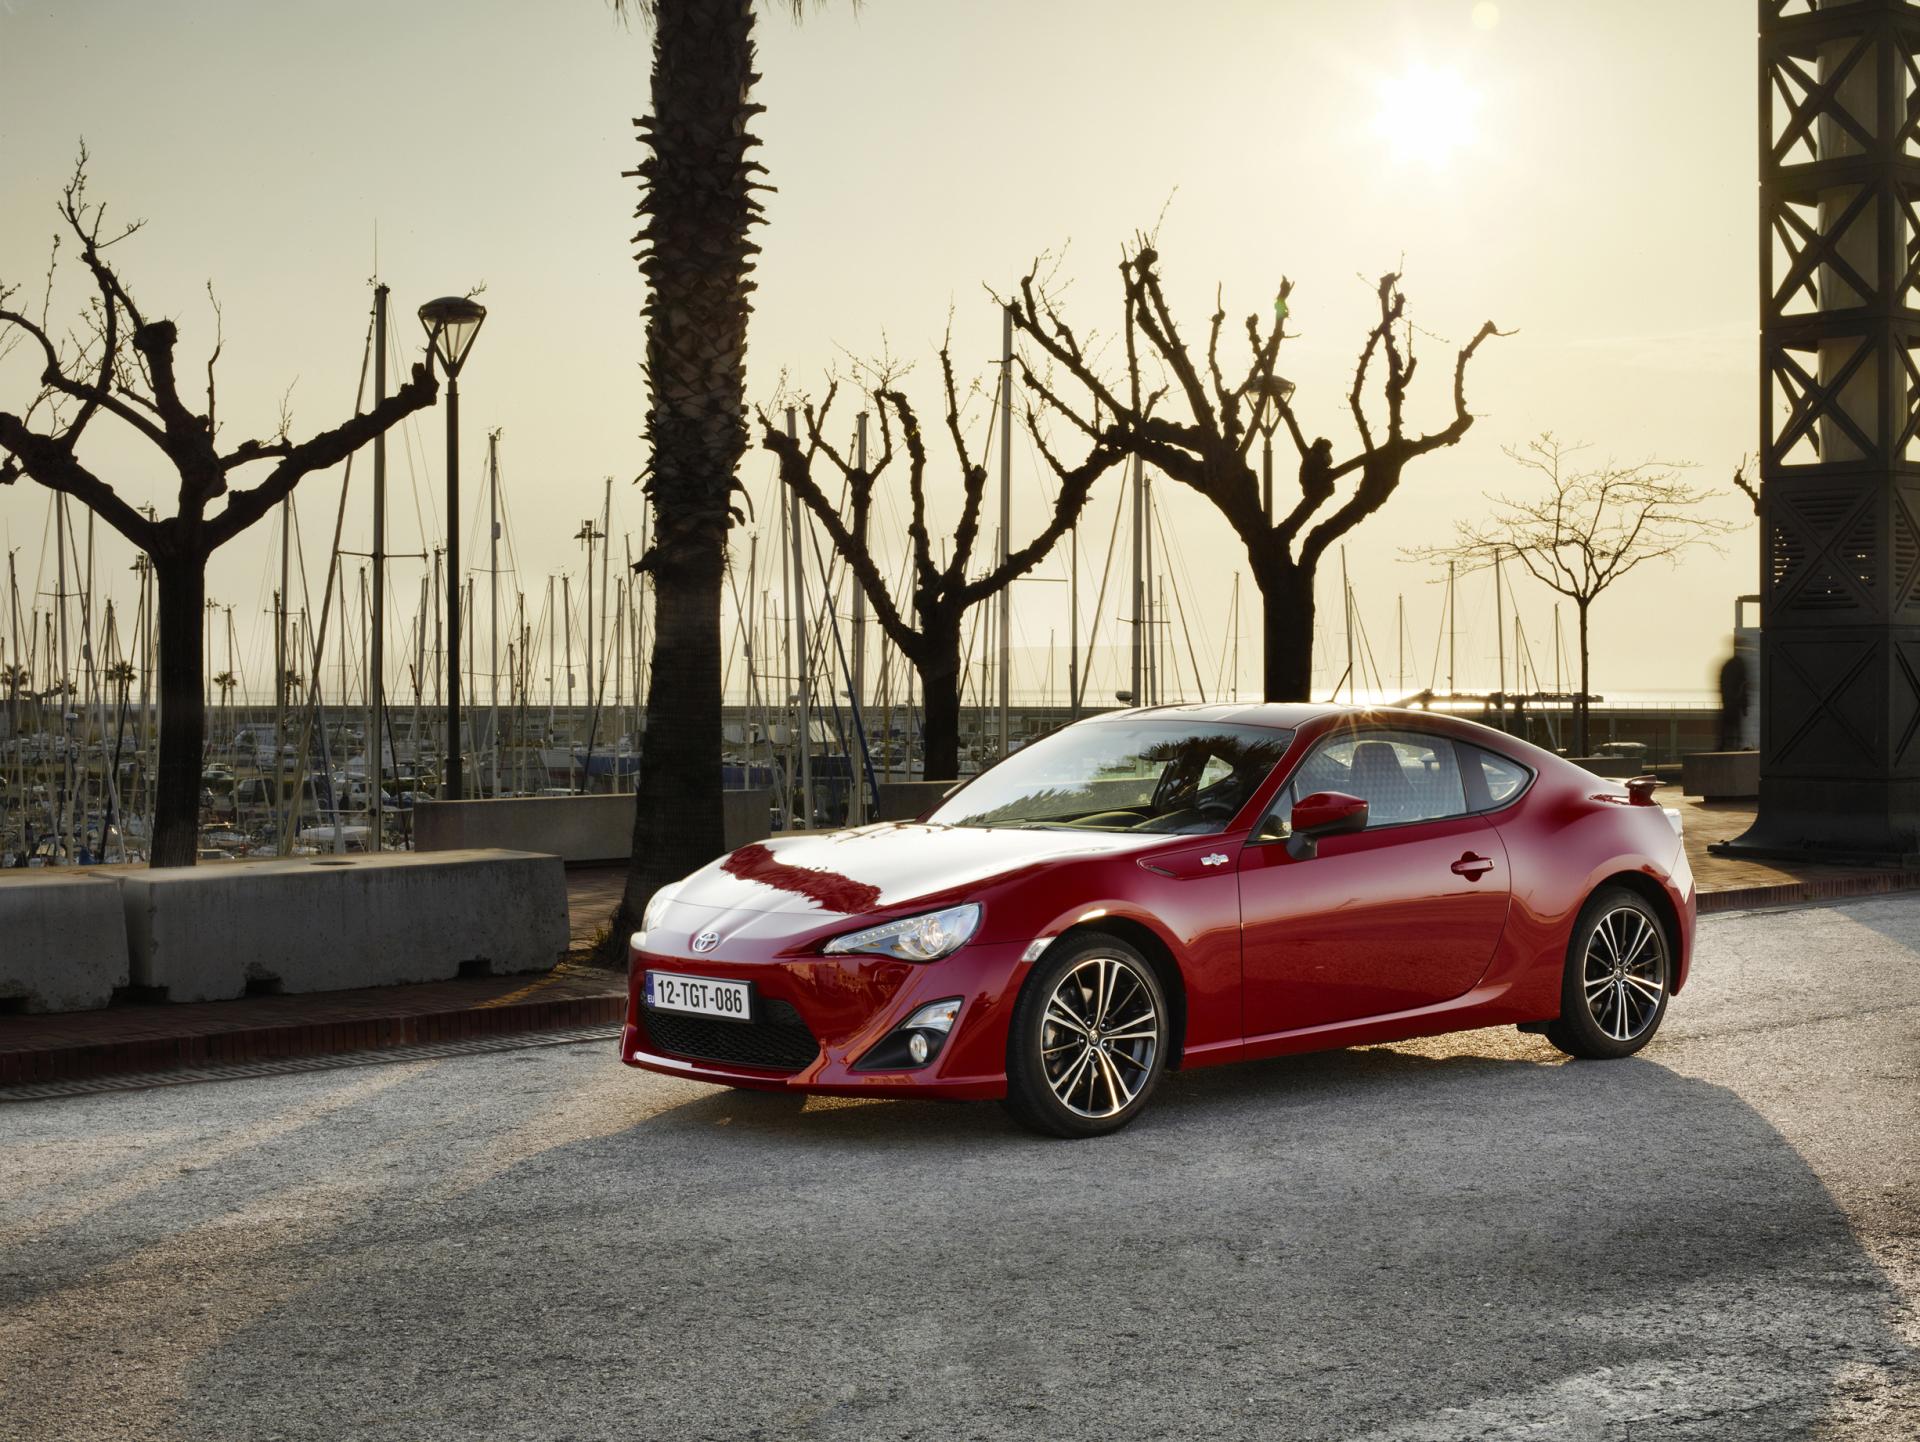 2012 Toyota GT 86 Images. Photo: Toyota-GT86-Supercar-Coupe-03.jpg